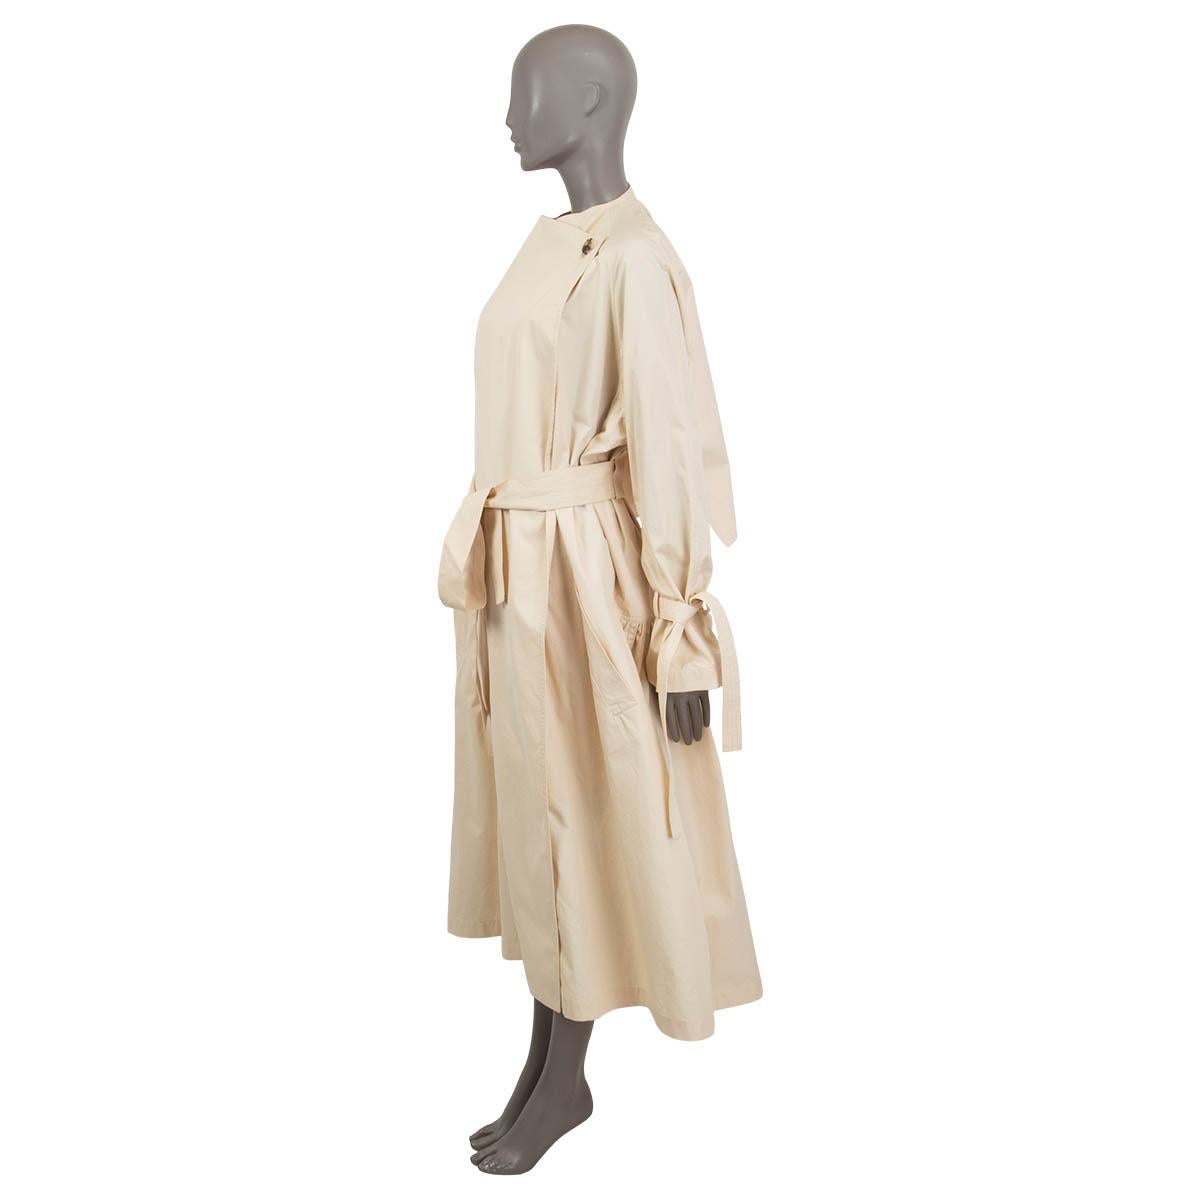 100% authentic J.W. Anderson one button oversized trench coat in cream cotton (100%). Features long raglan sleeves (sleeve measurement taken from the neck) and knotted cuffs. Has two side pockets and a detachable belt with an embroidered logo. Opens